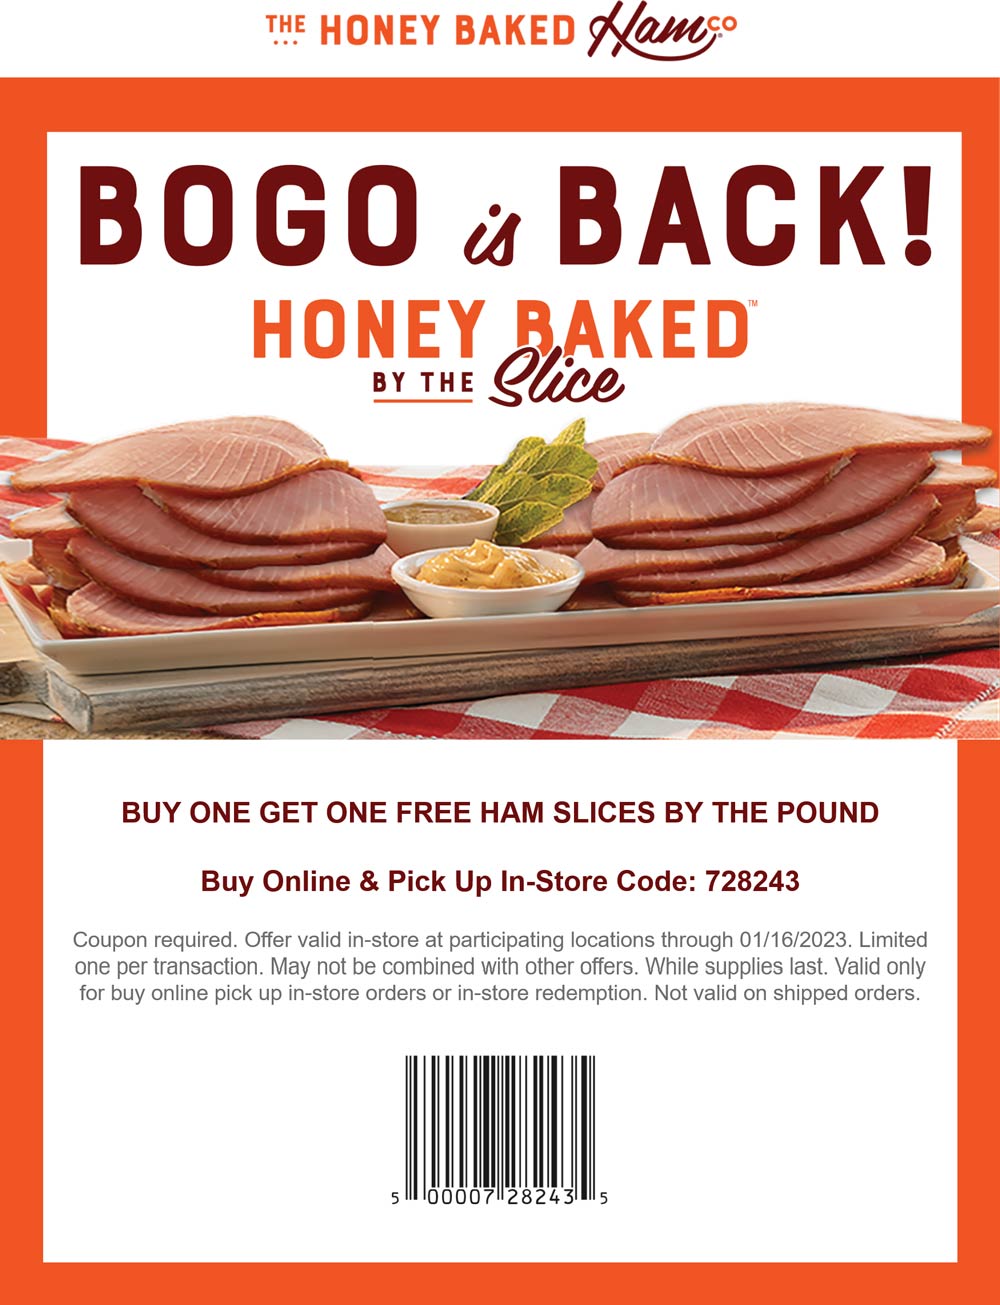 Honeybaked restaurants Coupon  Second pound of ham slices free at Honeybaked restaurants via promo code 728243 #honeybaked 